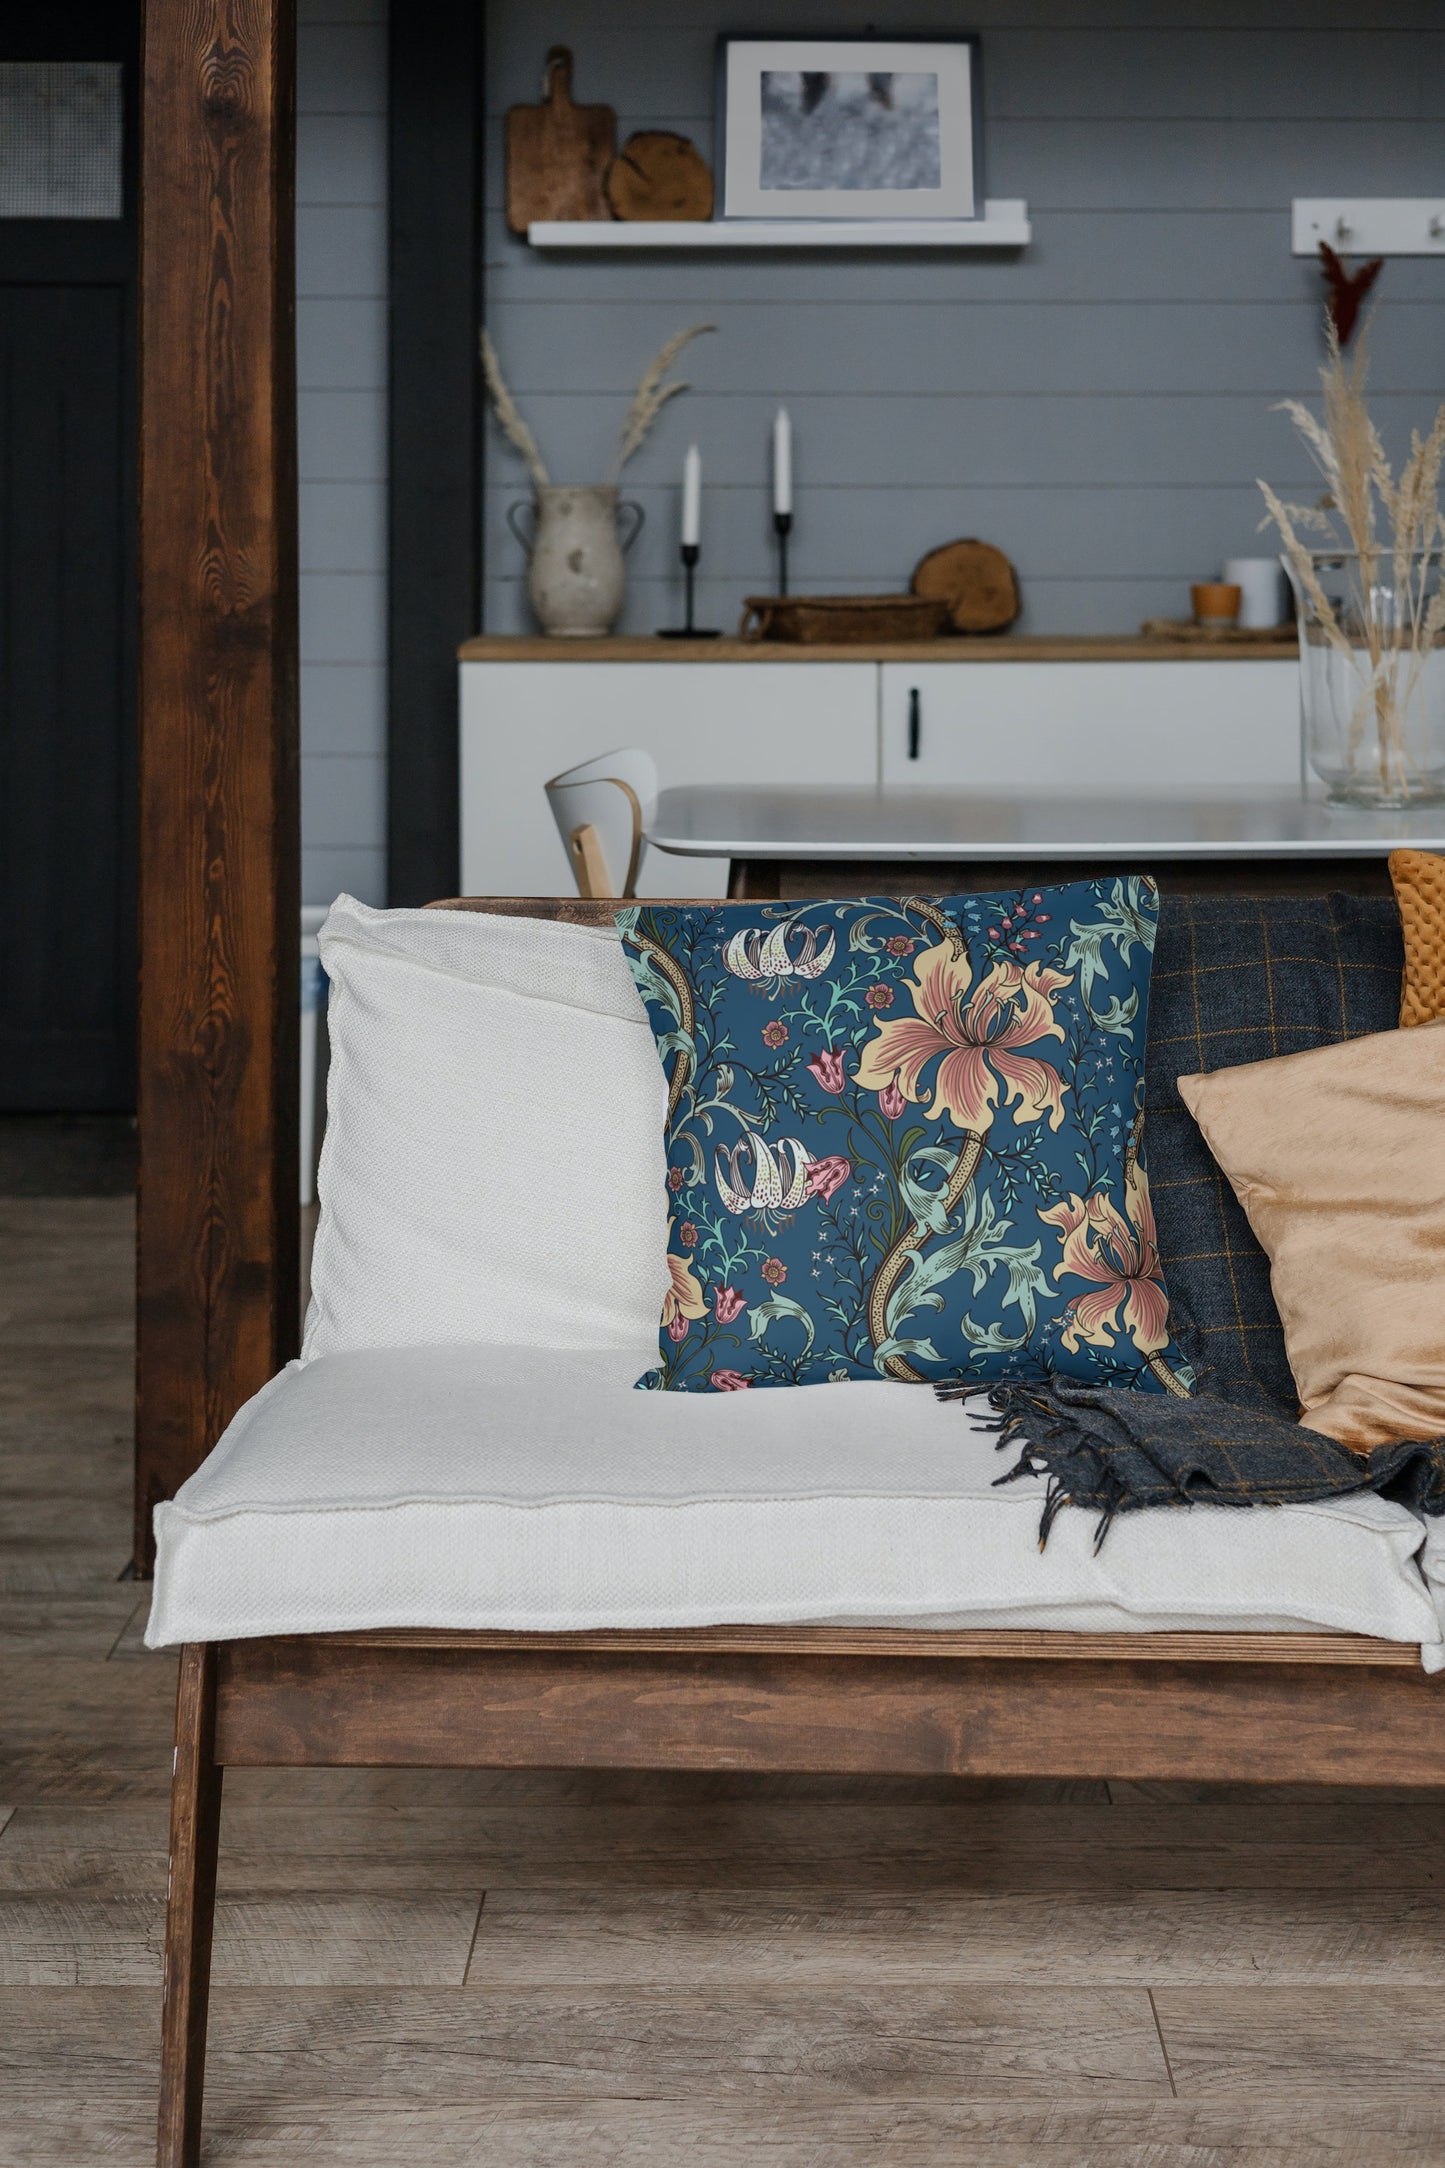 William Morris Cotton Pillows Enchanted Golden Lily Midnight Blue